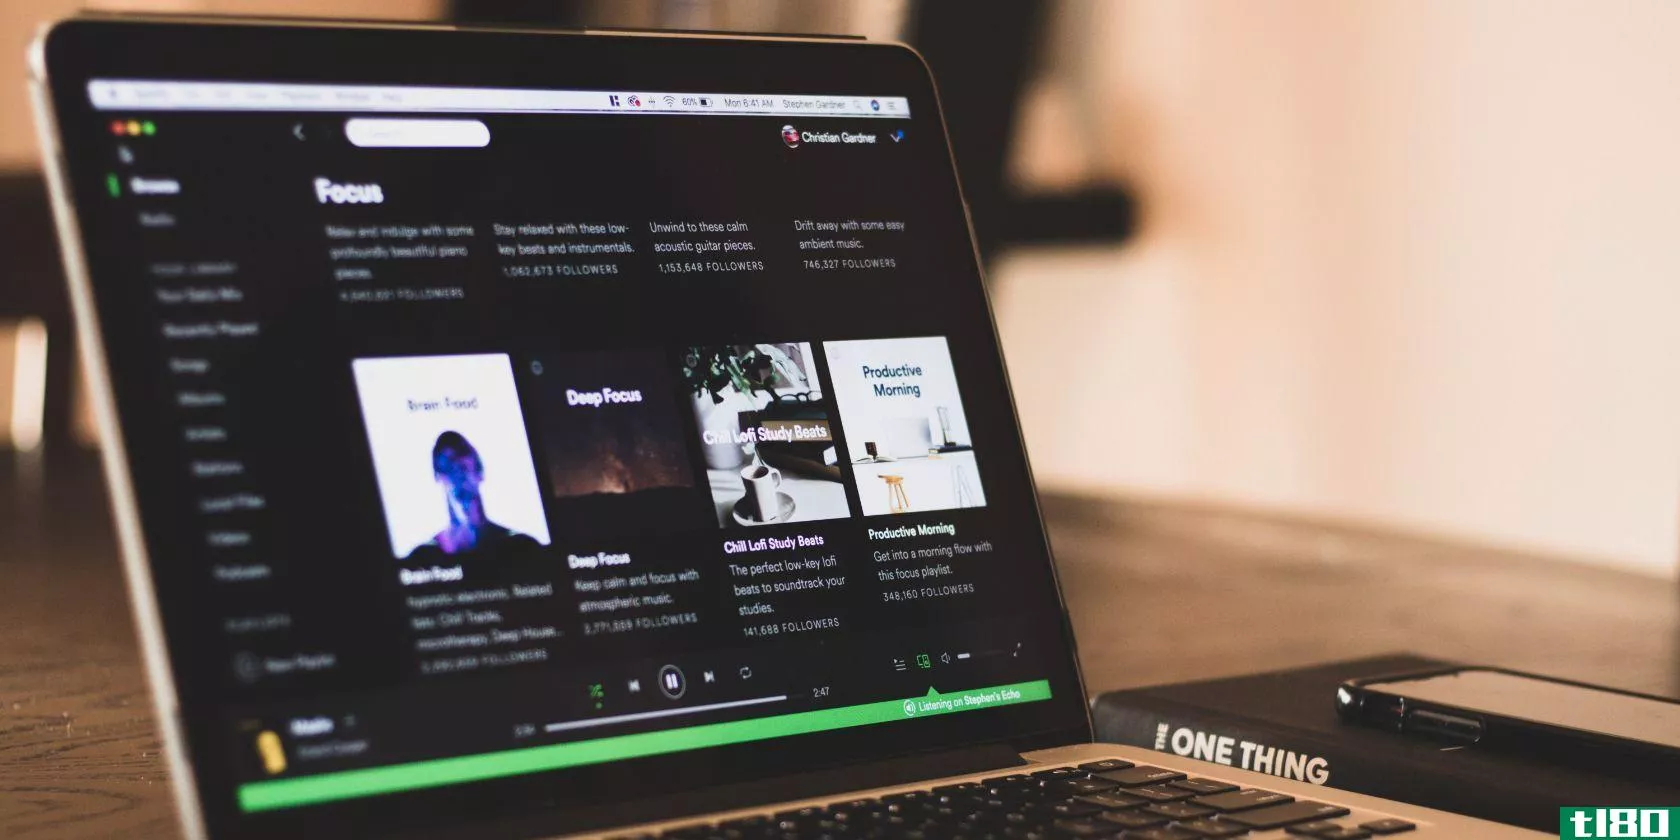 Spotify on a MacBook computer